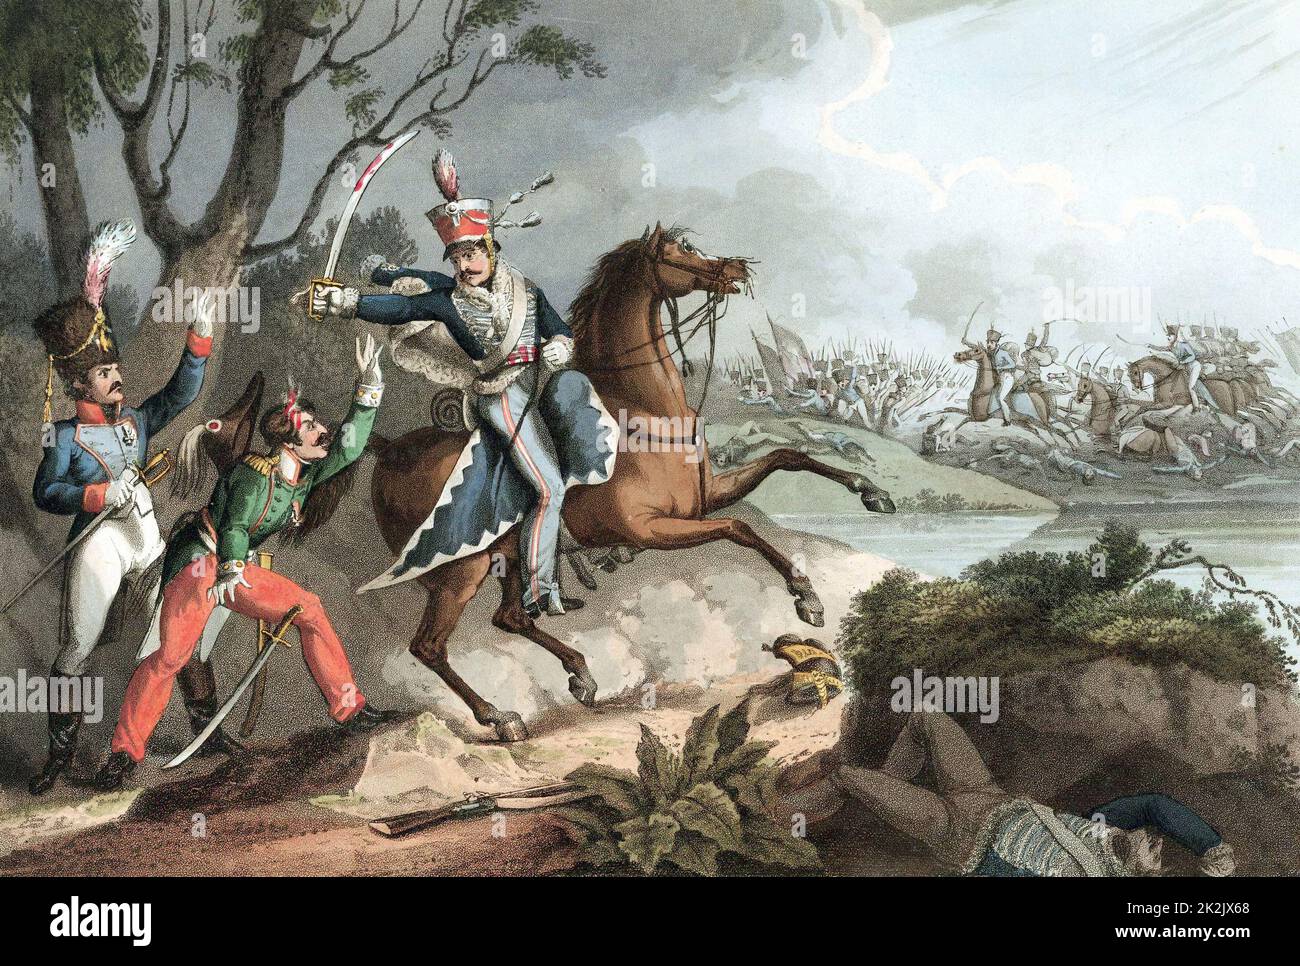 Napoleonic Wars: Battle of Albuera 16 May 1811, Beresford defeats Soult. Sergeant of 18th Hussars (British) takes French officers prisoner. Hand-coloured aquatint after W Heath 1817 Stock Photo